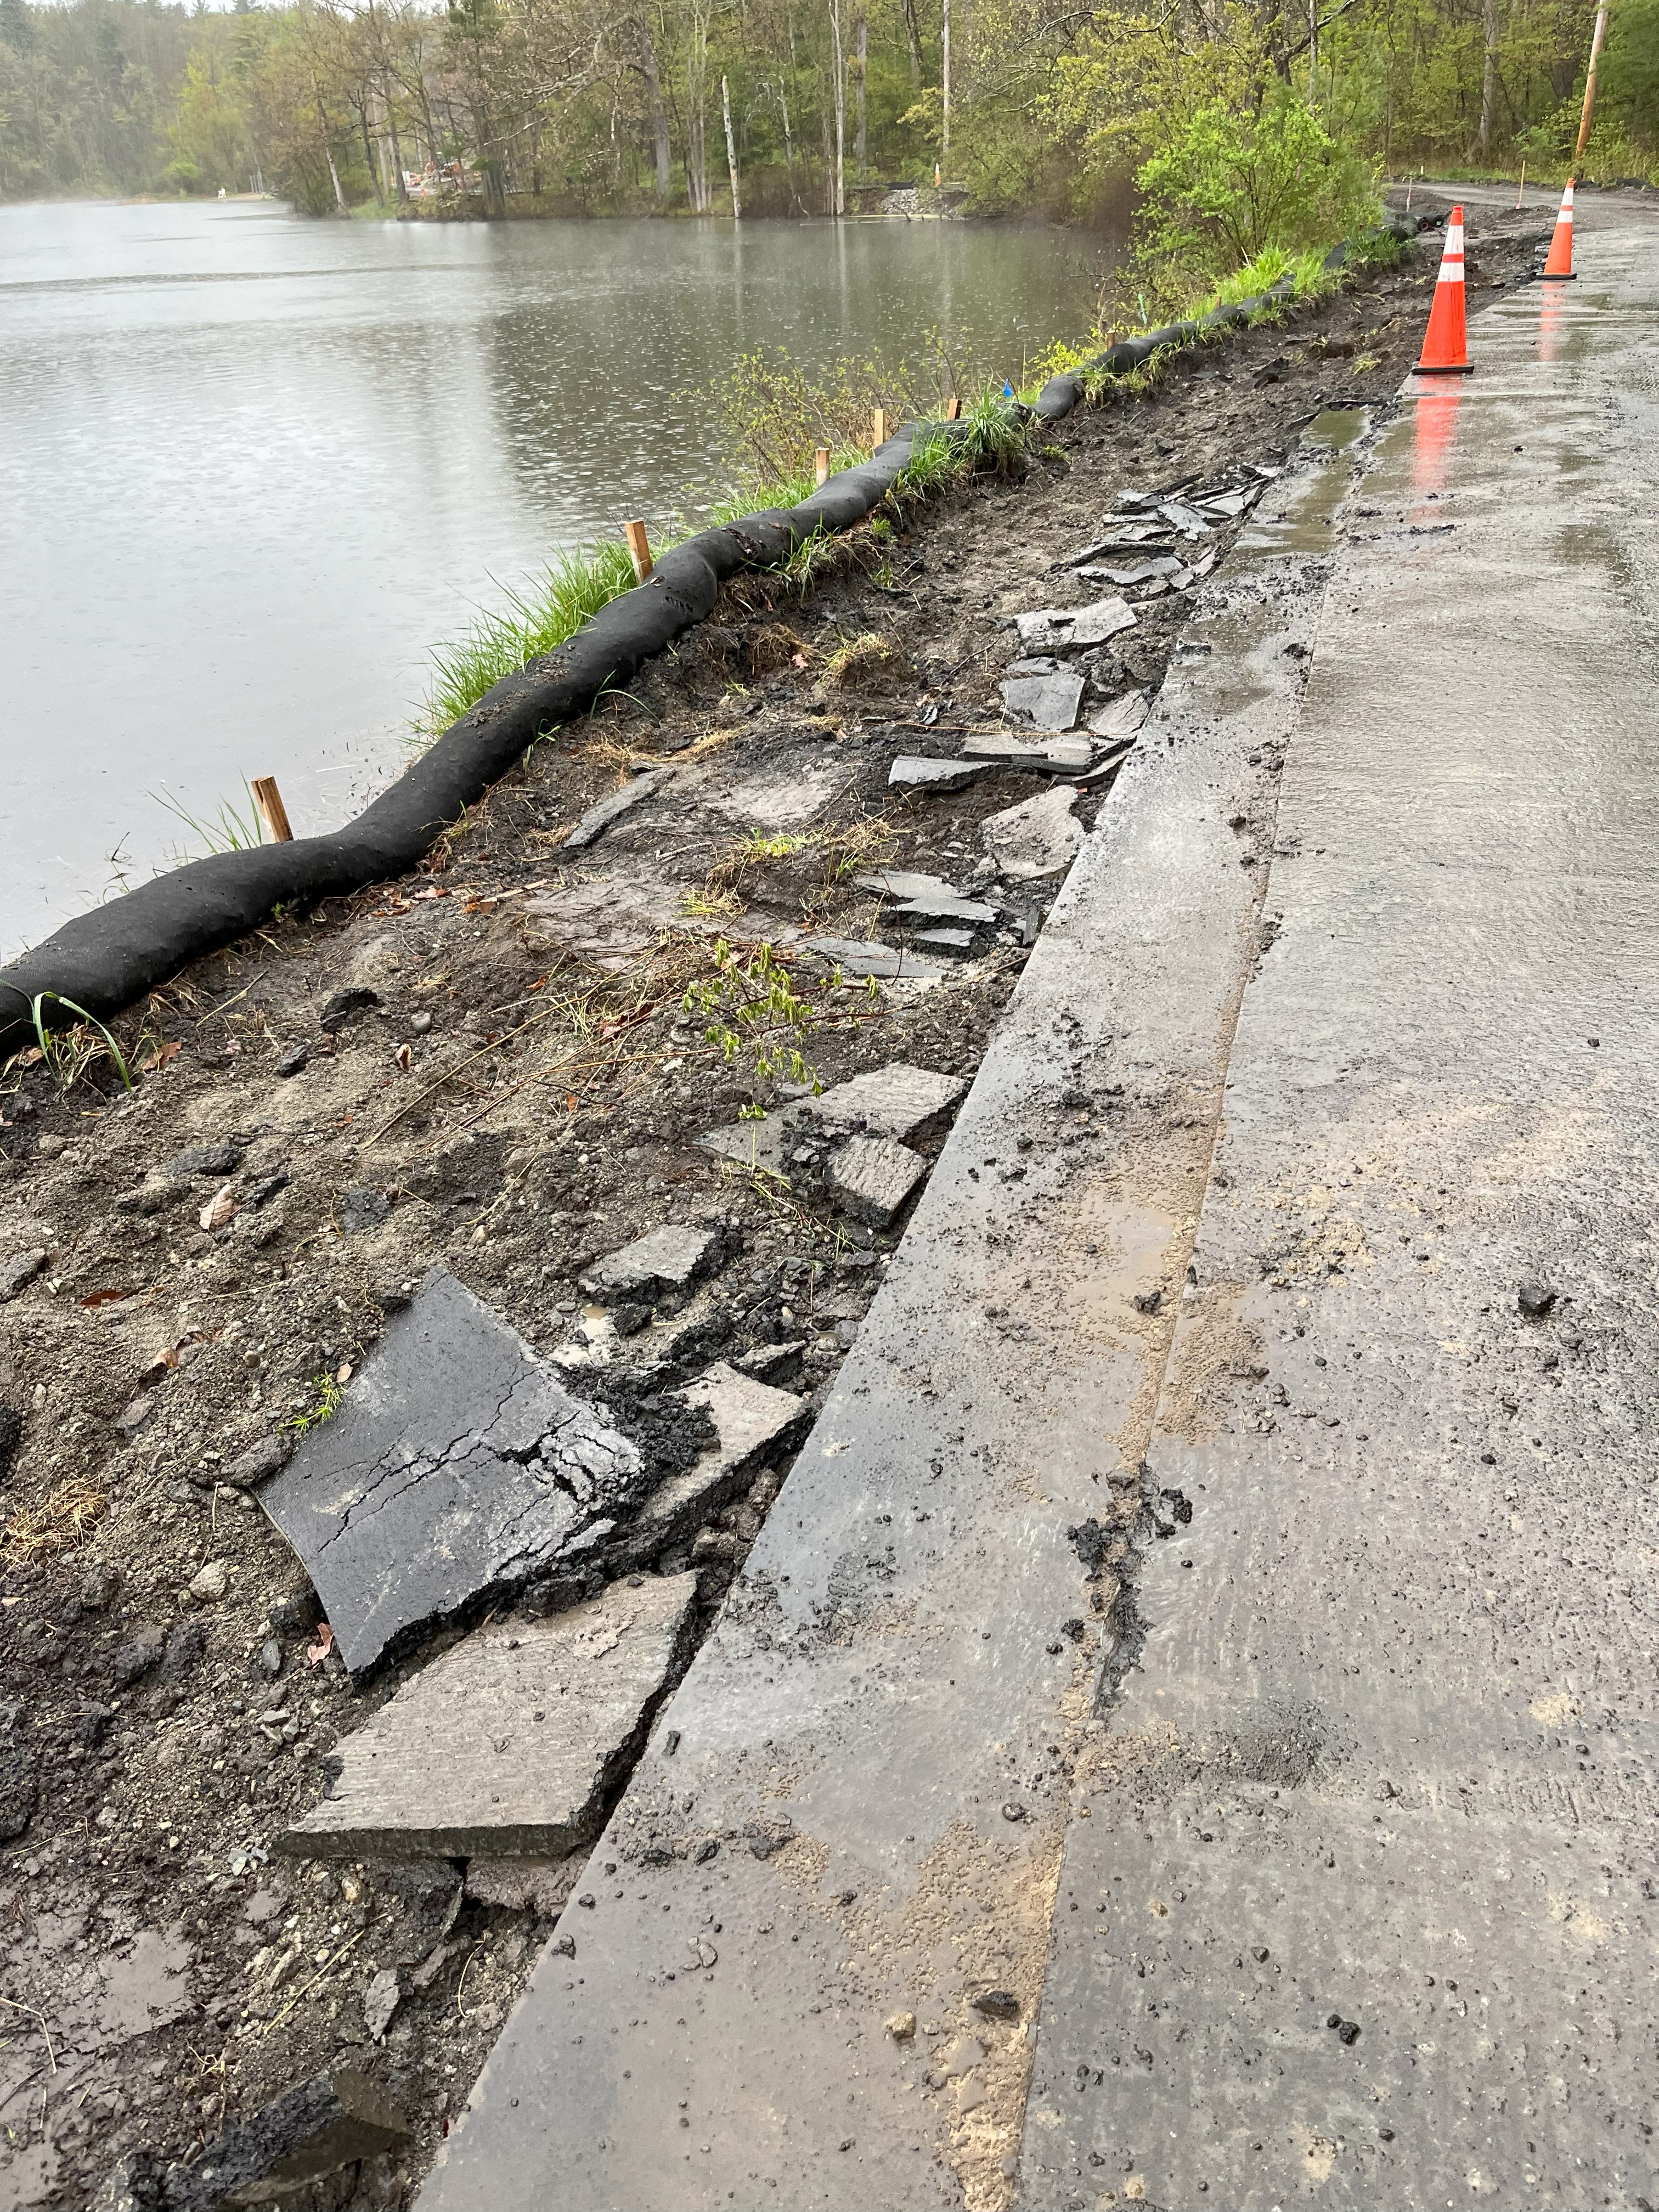 Lake Manfeild Improvement efforts are in full swing, pavement is being removed to create a wider buffer zone and to allow the creation of a trail to replace the roadway along the lake edge